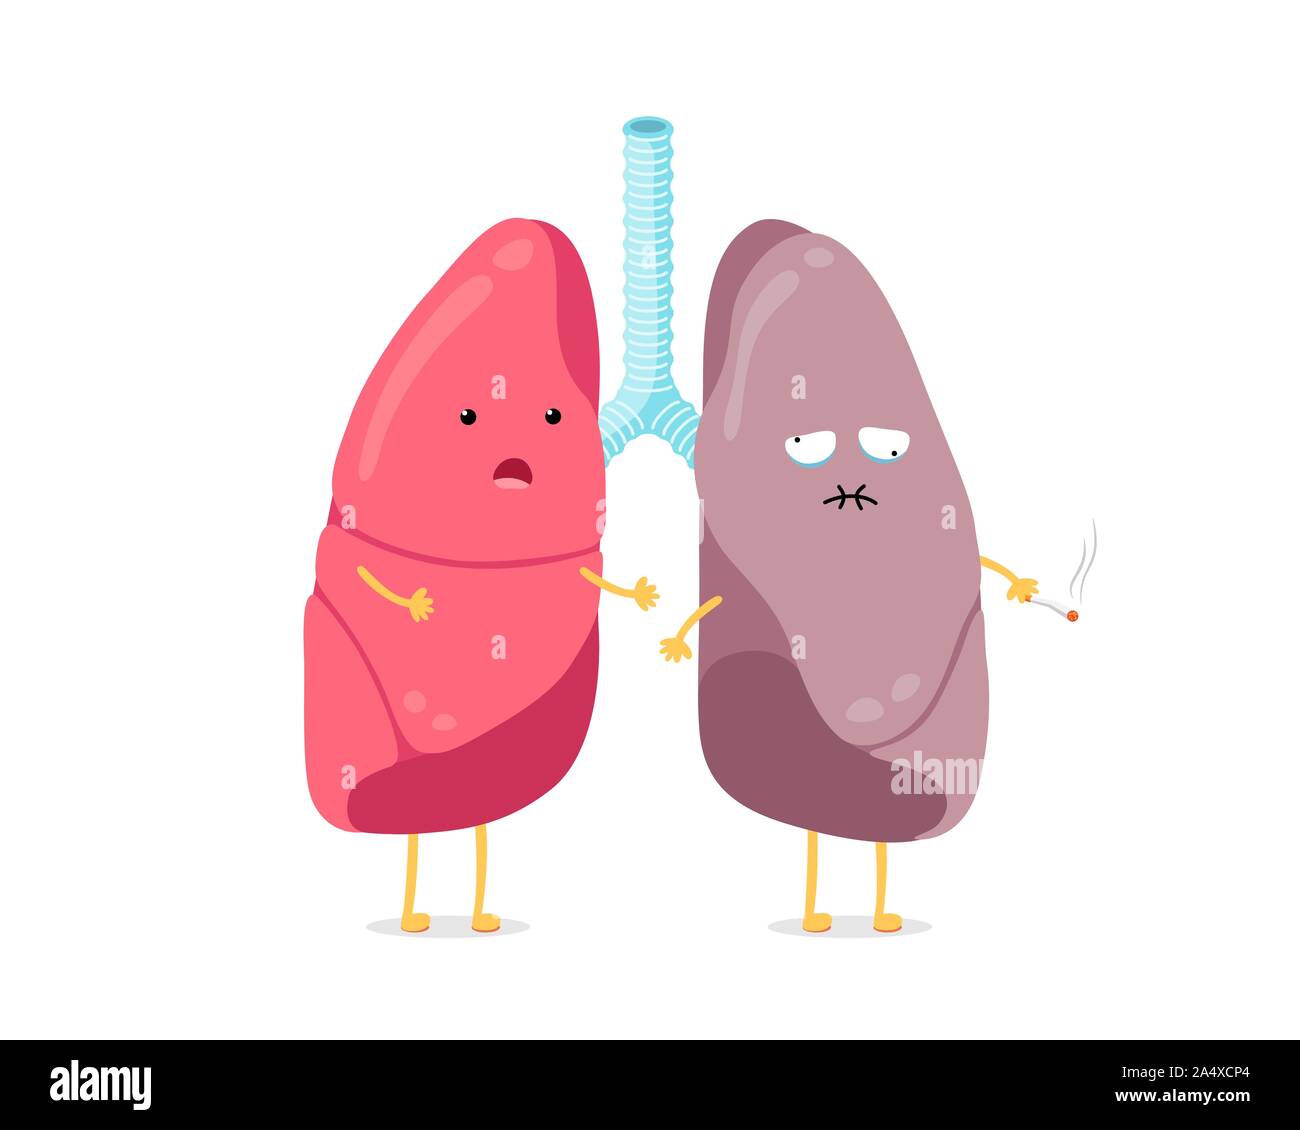 Cute cartoon funny lungs character healthy and smoker. Strong surprised and suffering sick smoking lung mascot. Human respiratory system internal organ compare. Medical anatomy vector illusrtation Stock Vector